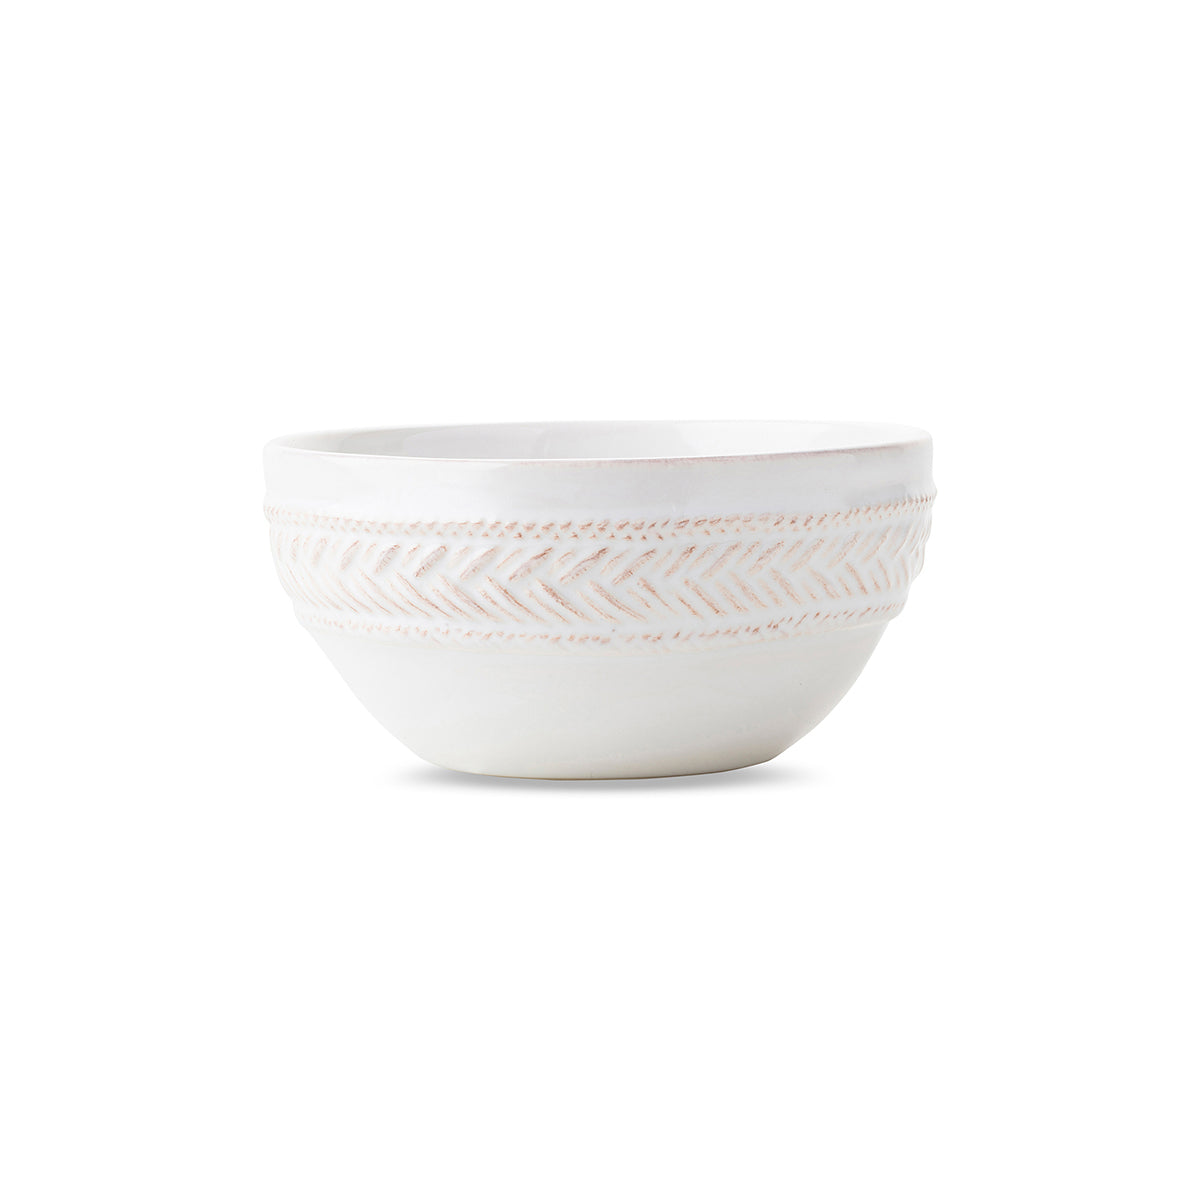 Perfect for your morning yogurt and granola or an evening indulgence of something fabulously sweet, this berry bowl with braided basket-weave trim is sure to become a daily staple.